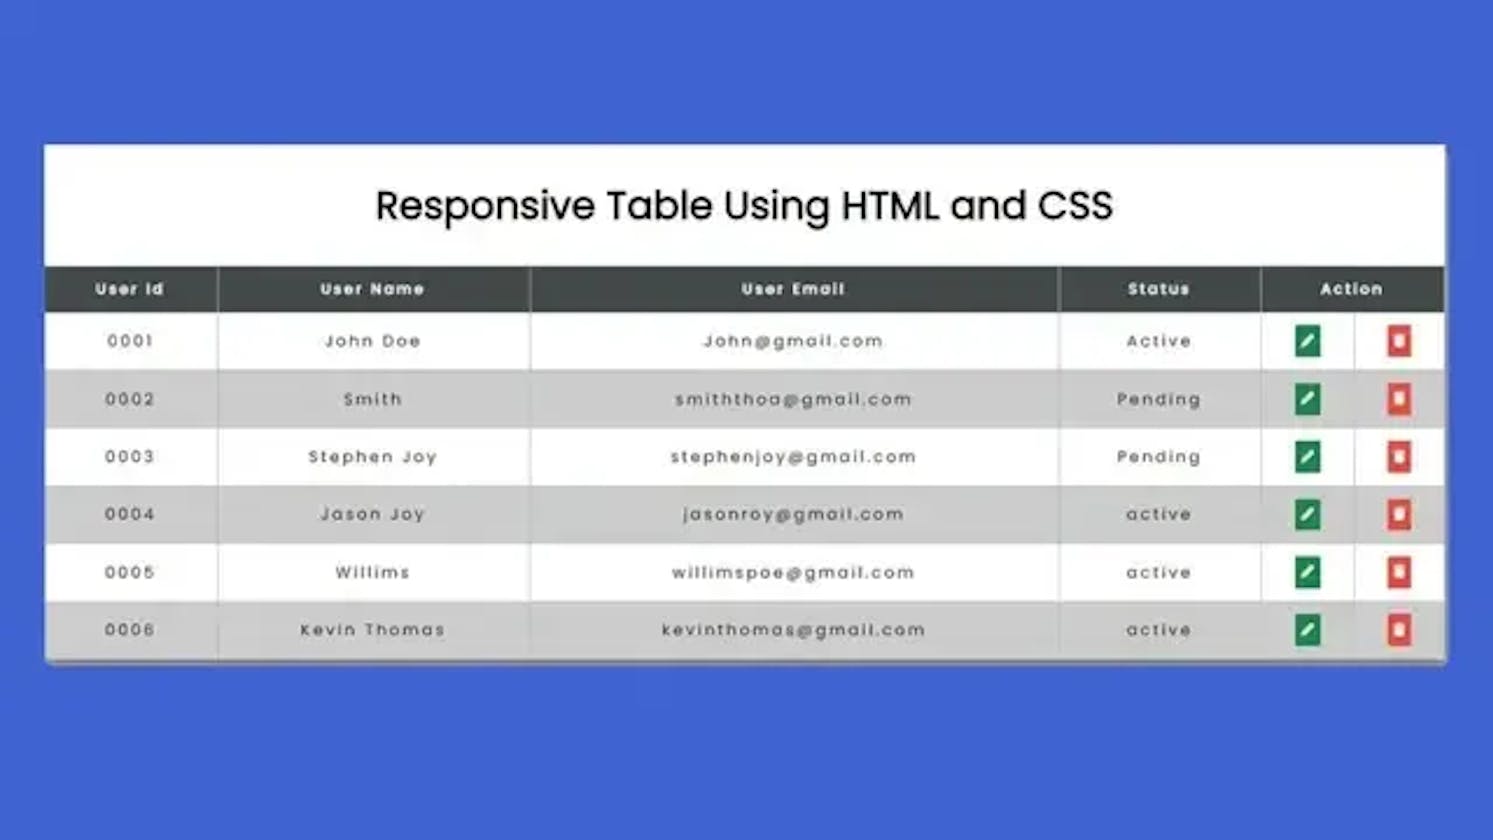 How to Make a Responsive Table in HTML and CSS